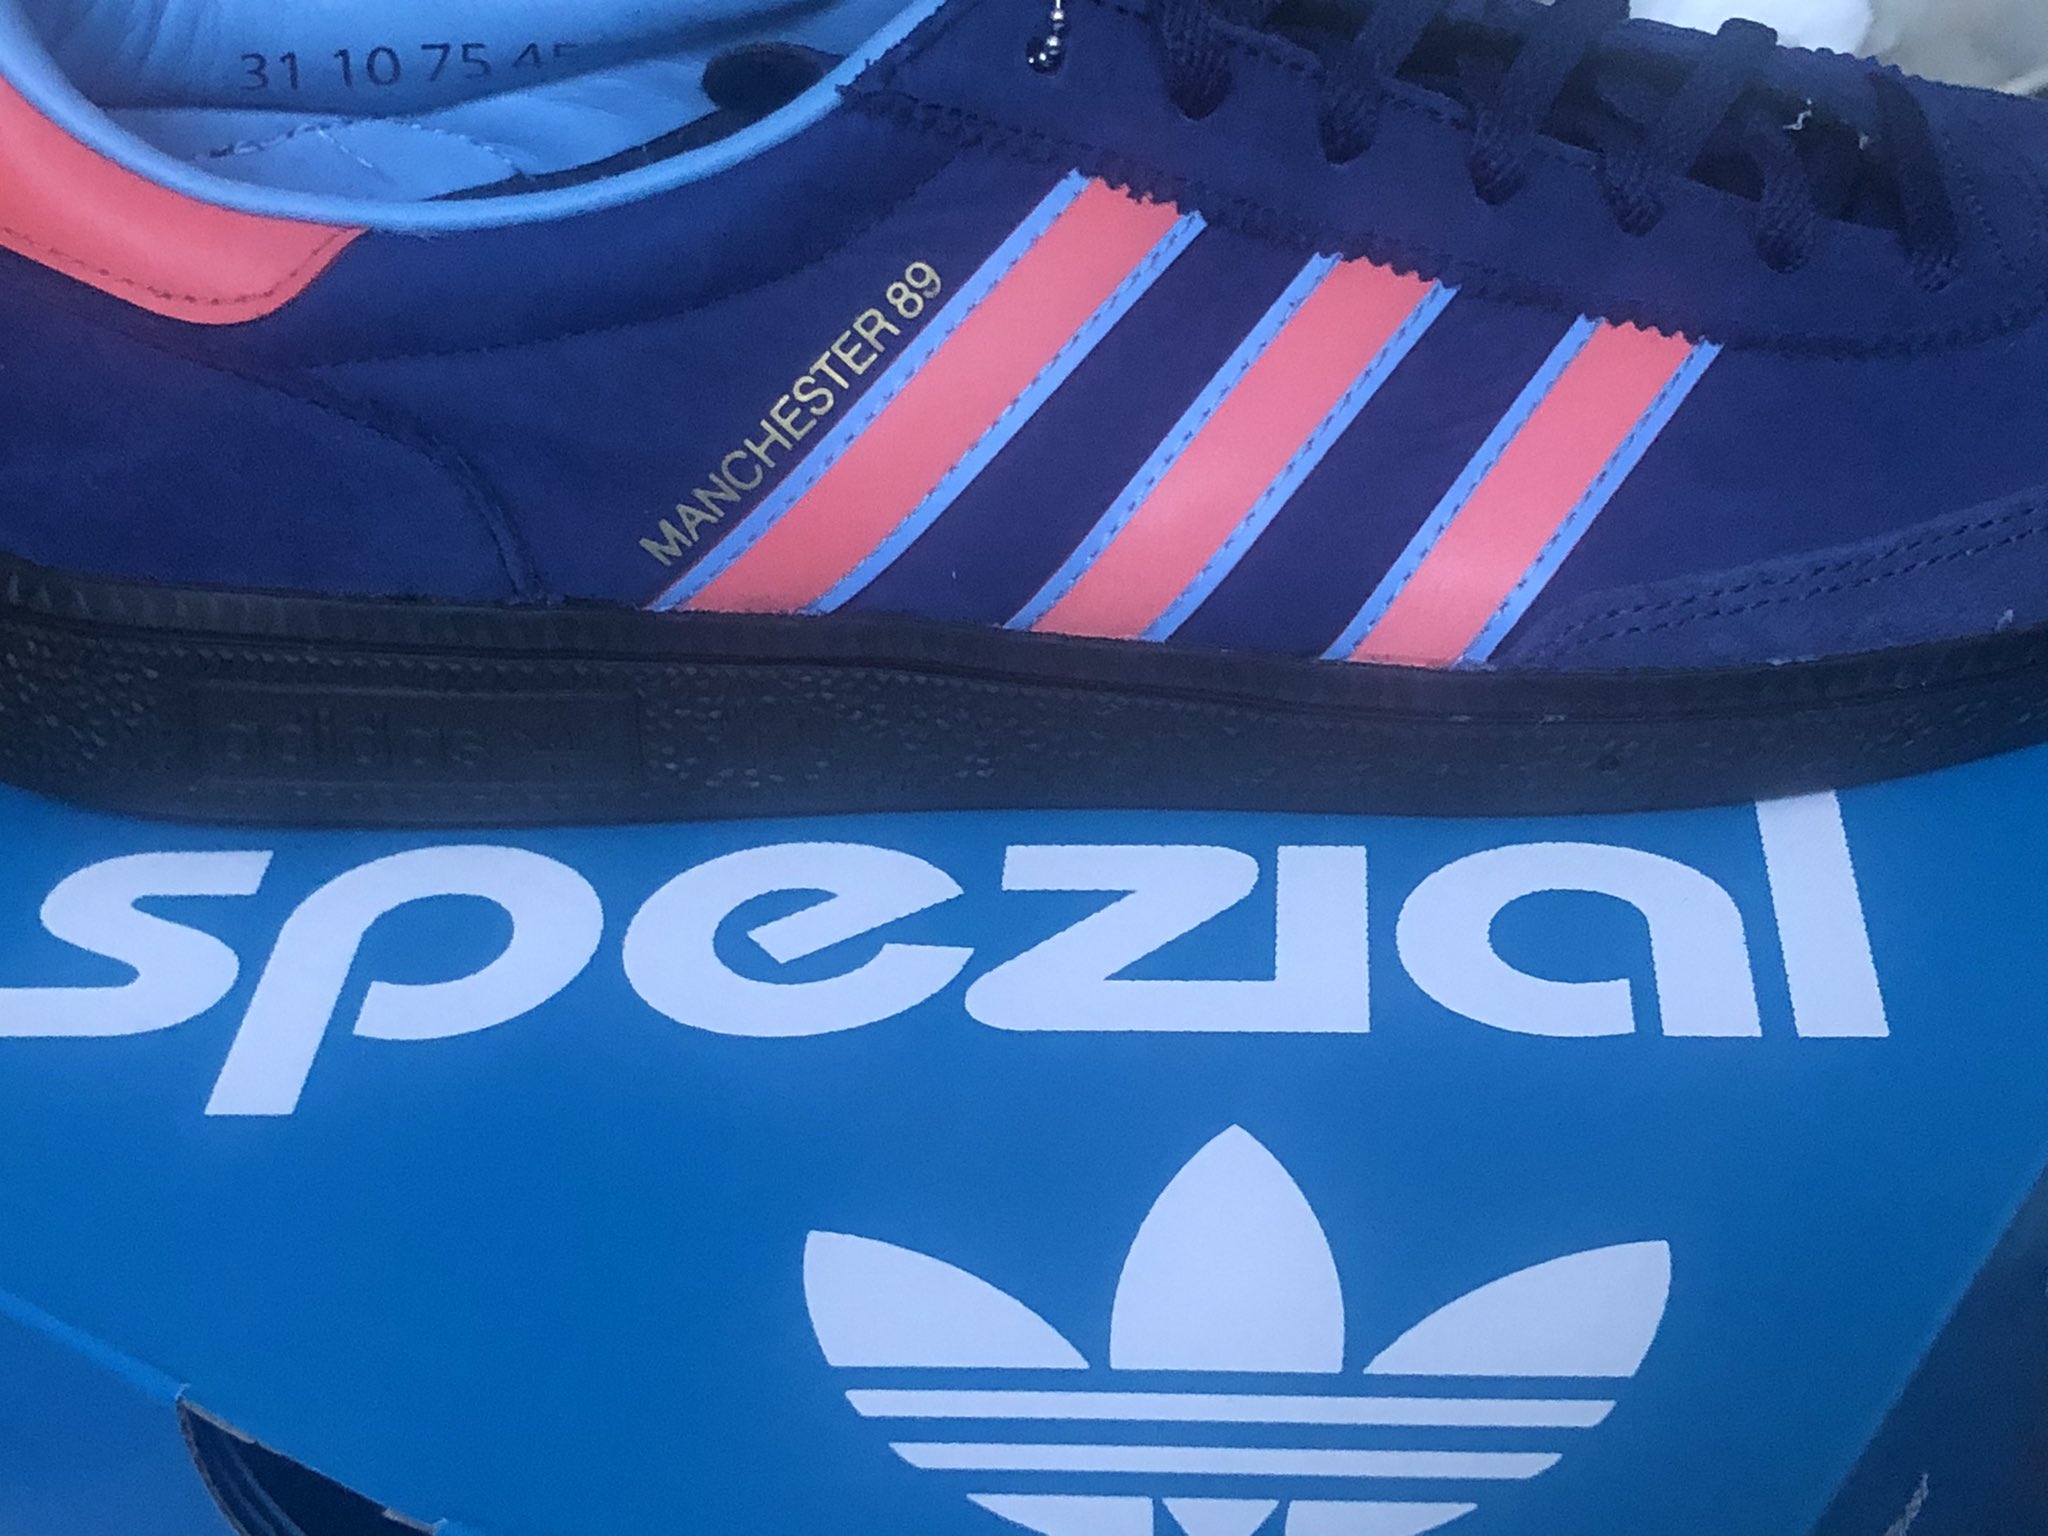 Kevin Cummins on Twitter: "Brilliant Manchester 89 trainers from #adidas # spezial - '89 of course was a 'spezial' year for #ManCity, as we beat  United 5-1 on 23 Sept. Great shoes from #